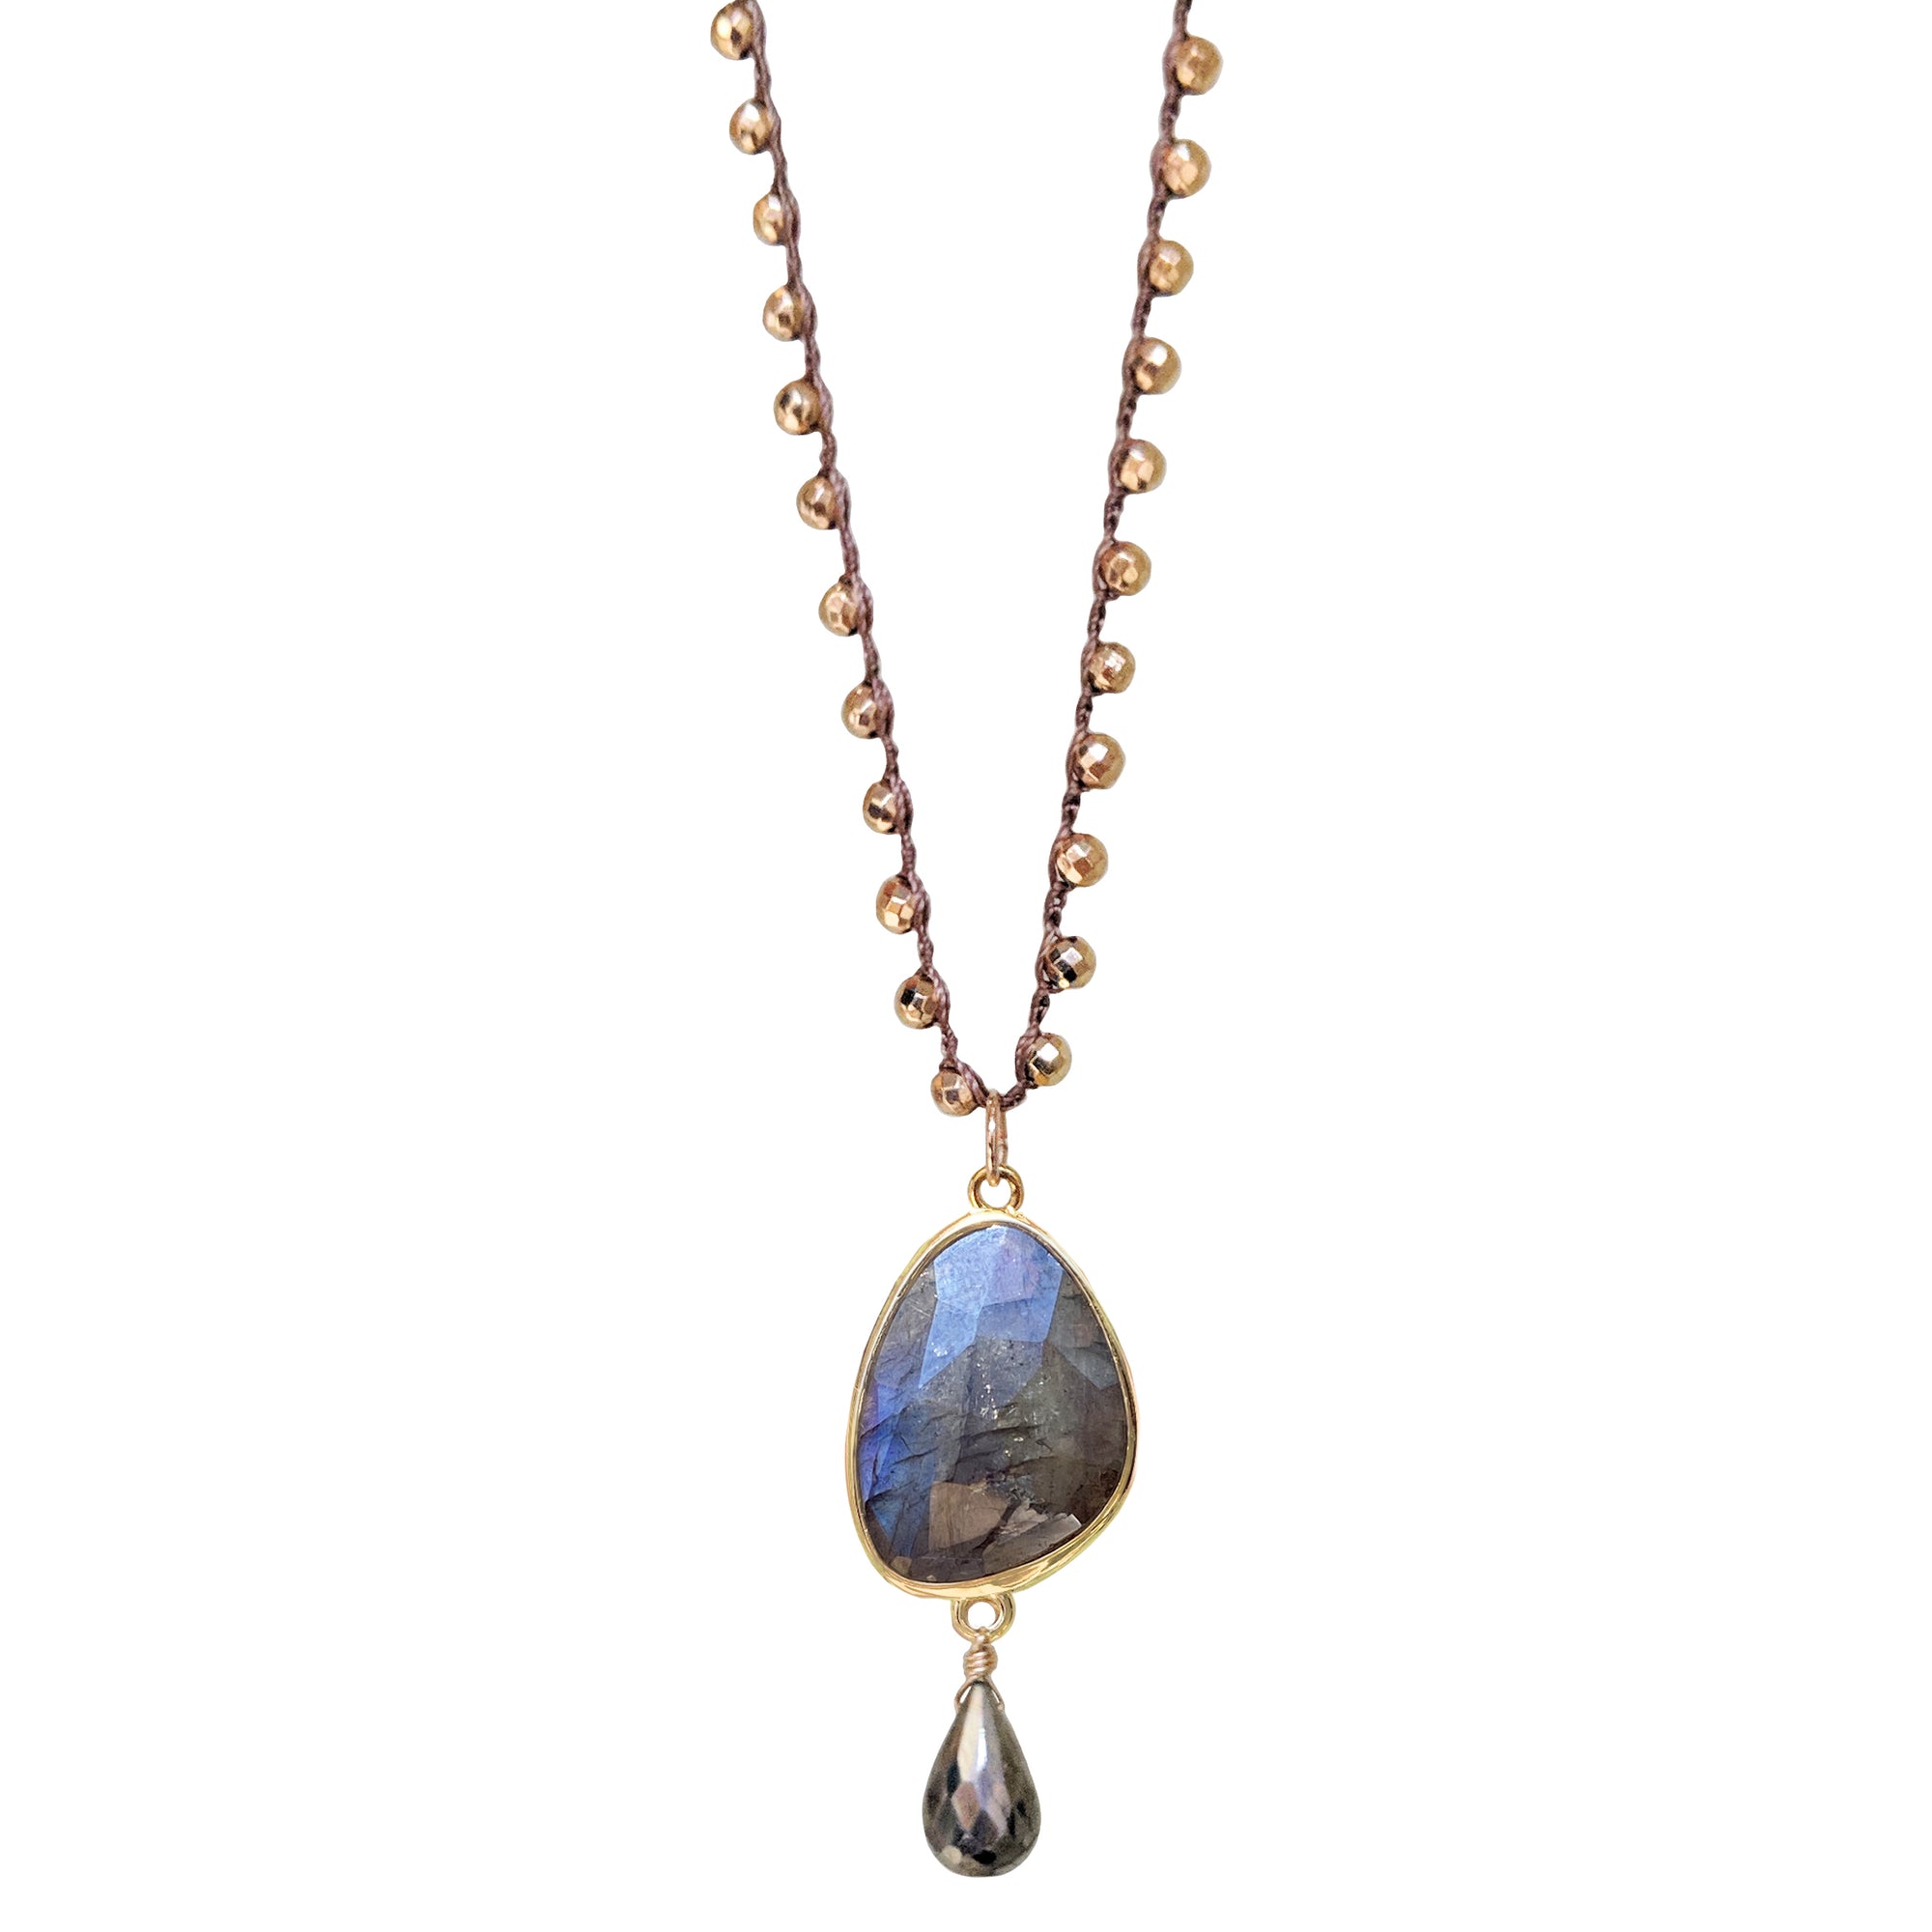 Sumiko Necklace in Labradorite With Pyrite